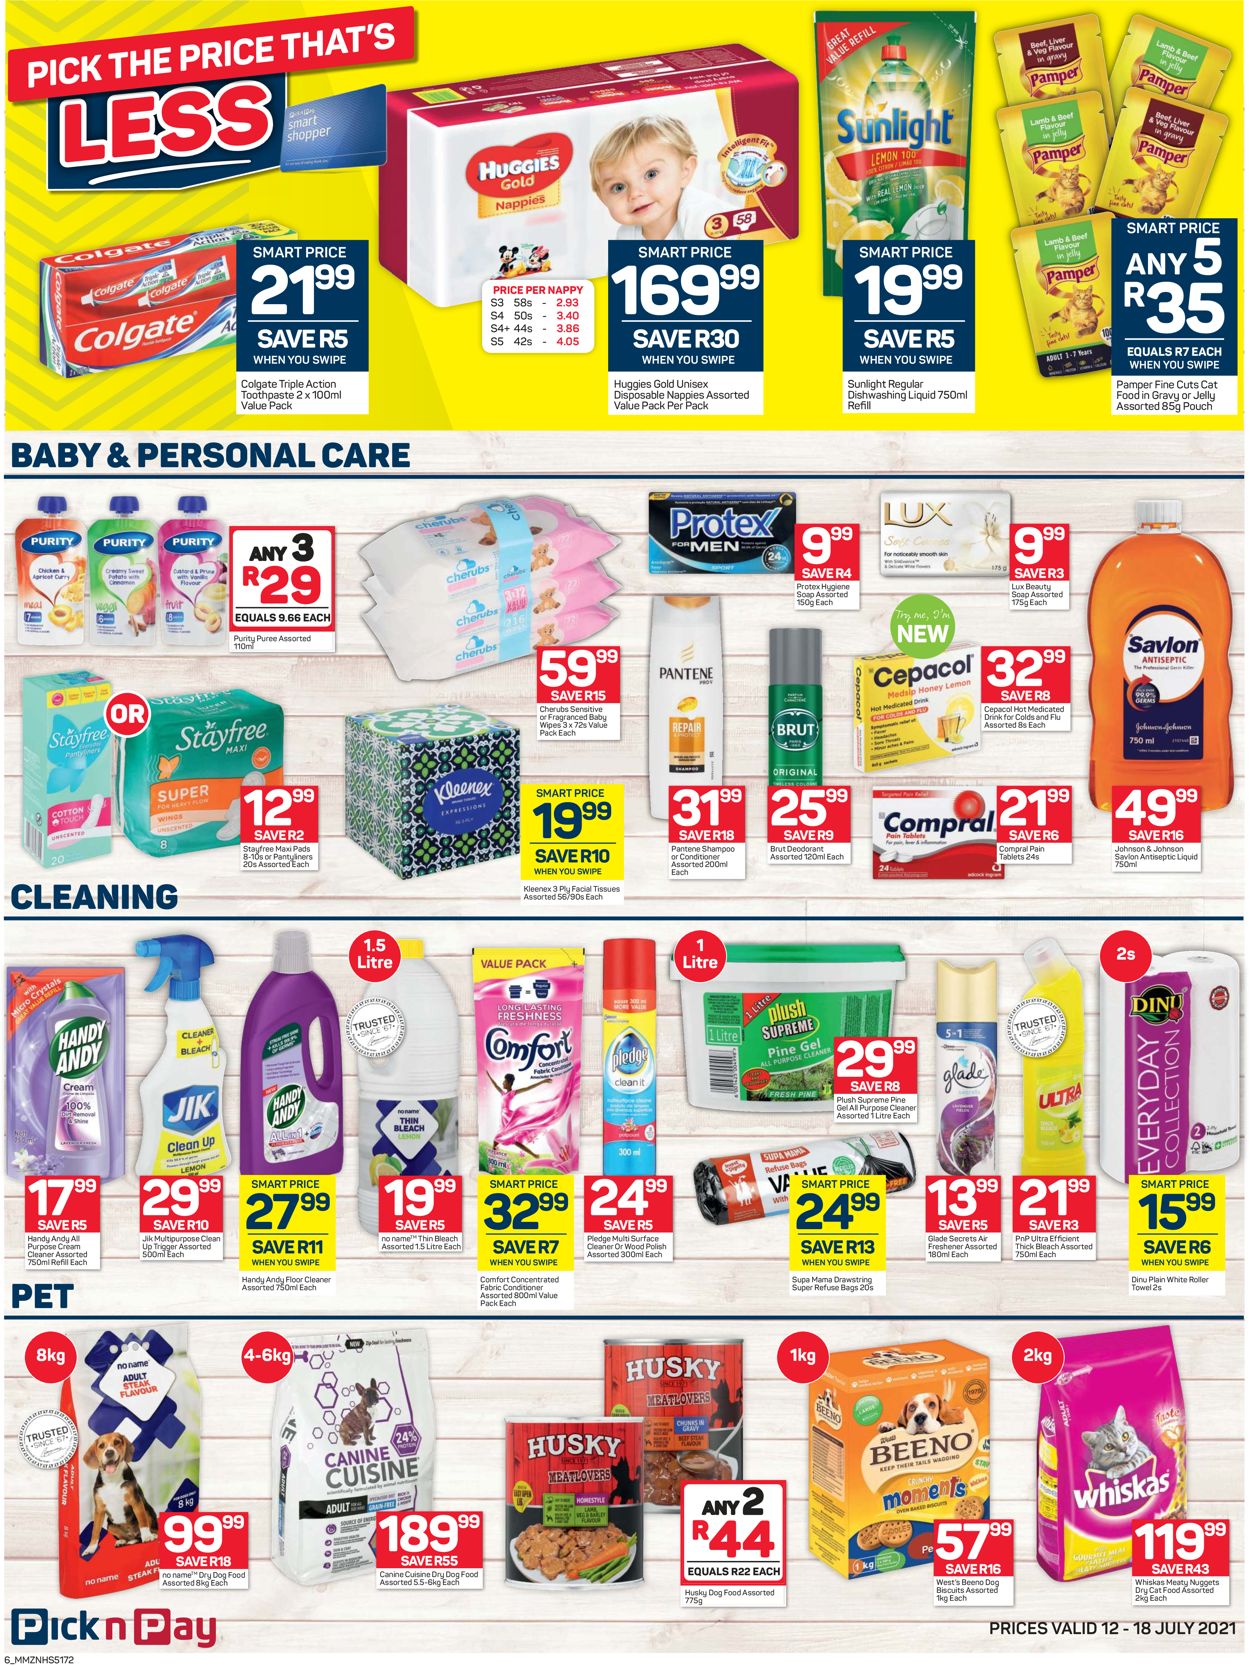 Pick n Pay Catalogue - 2021/07/12-2021/07/18 (Page 6)